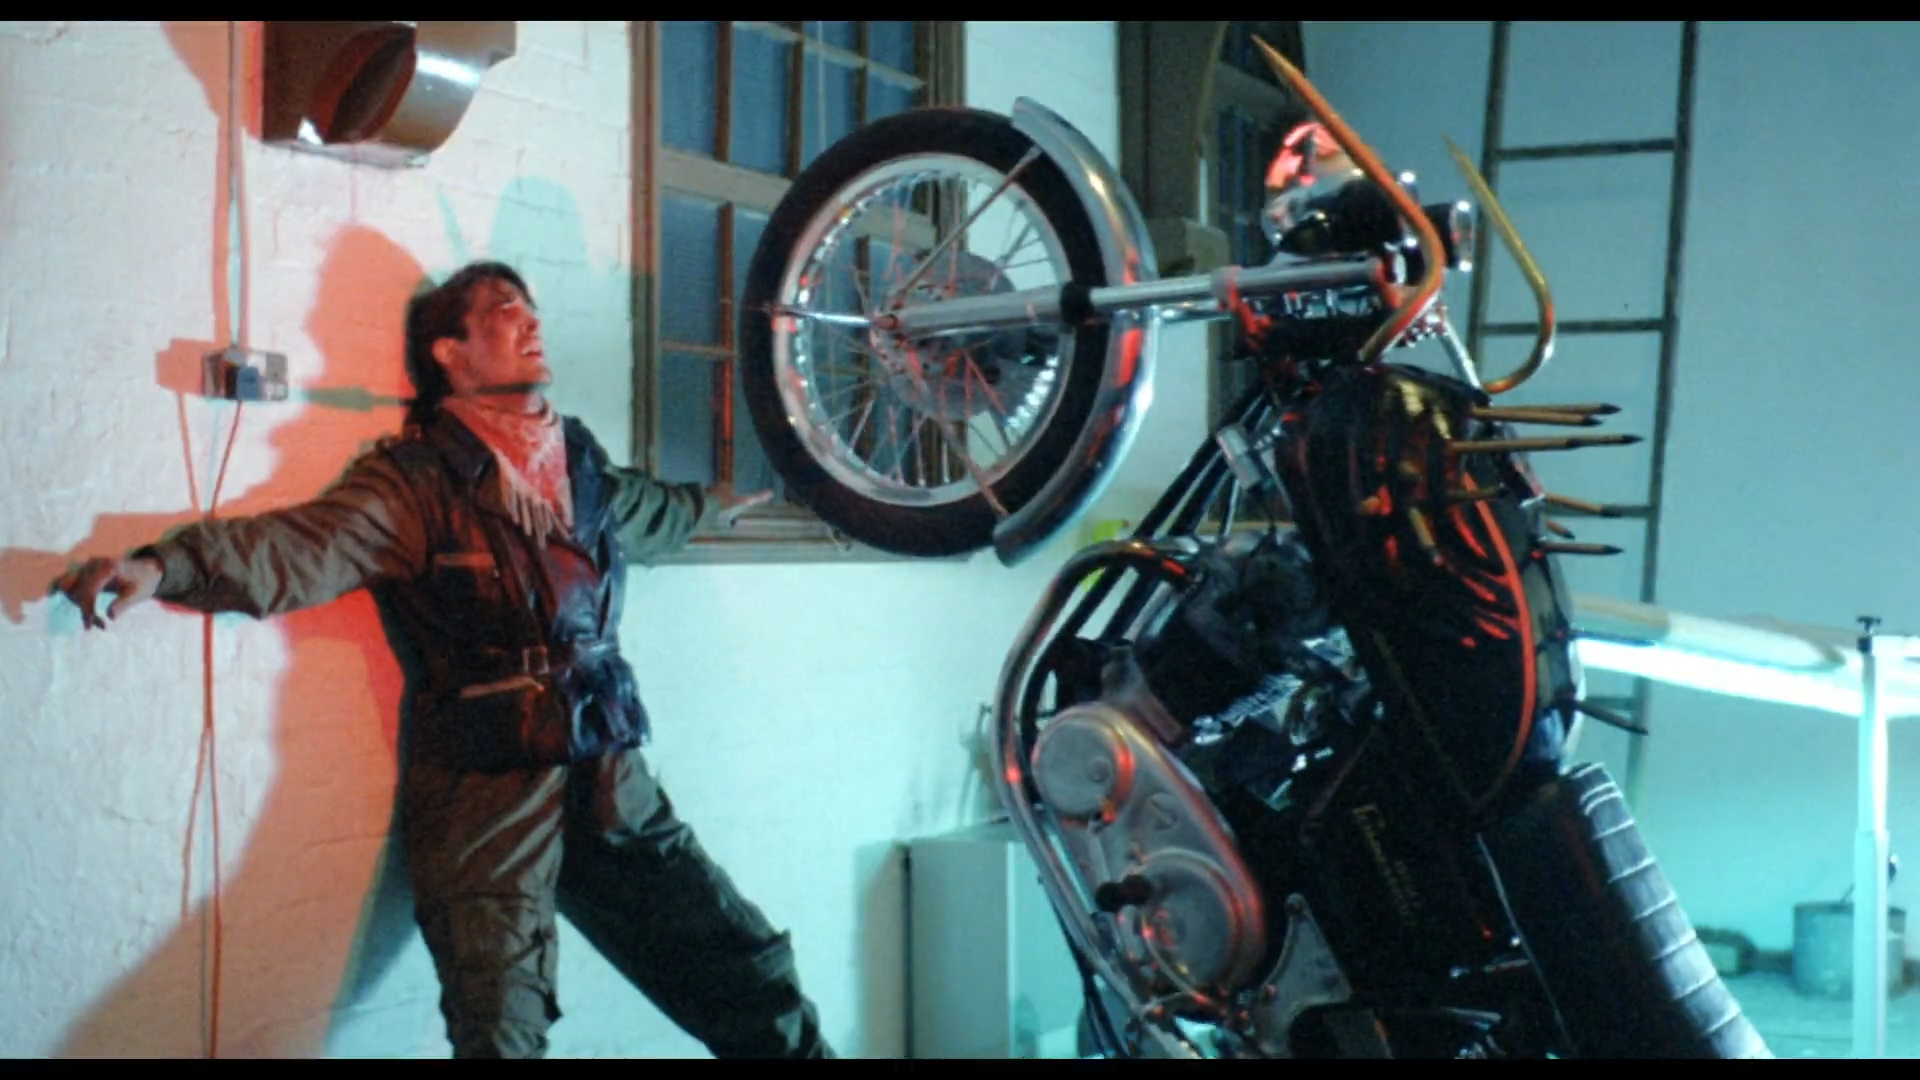 [Film] I Bought A Vampire Motorcycle, de Dirk Campbell (1990)